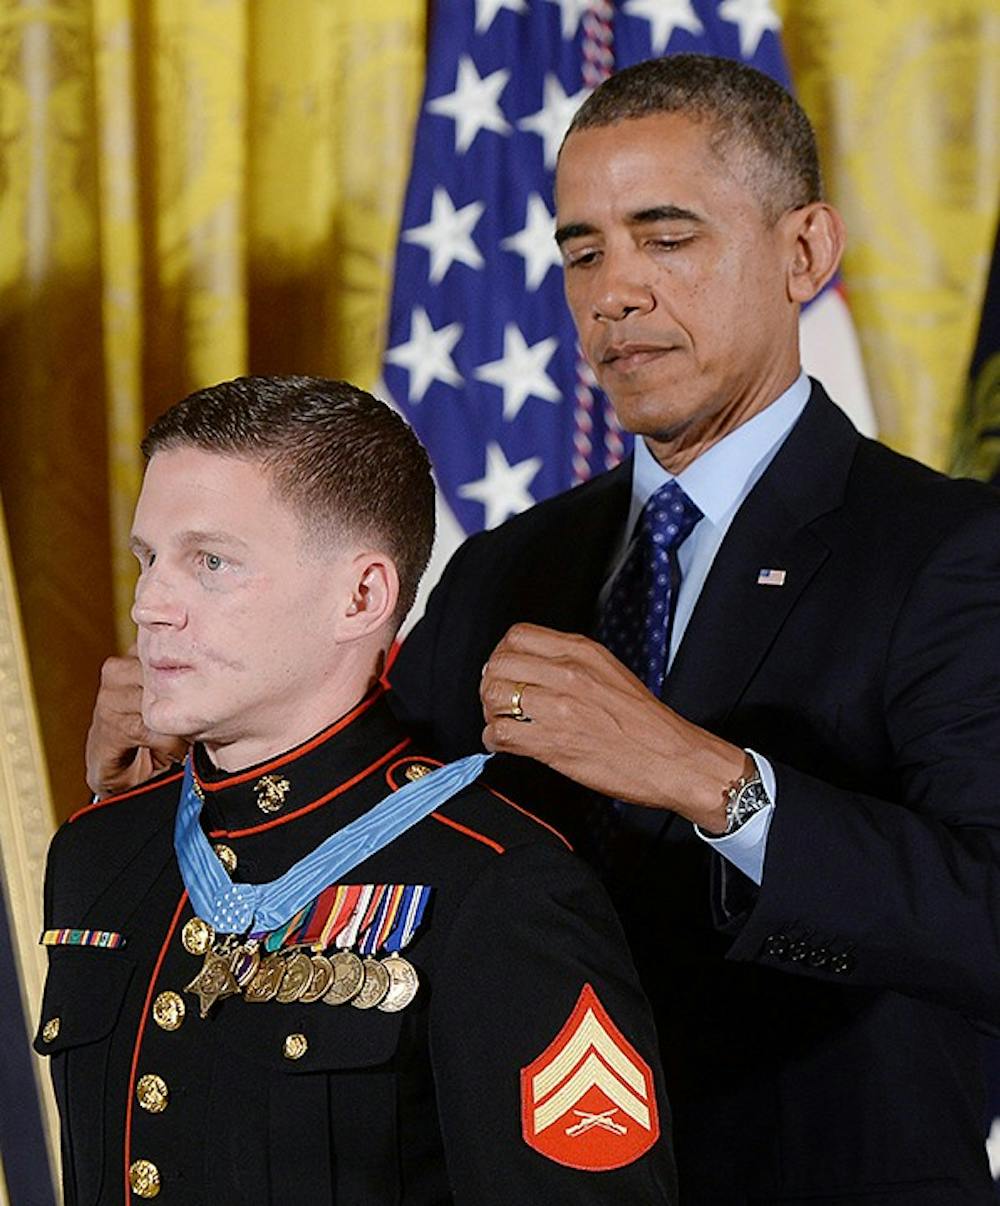 U.S. Marine Corps Cpl. William &quot;Kyle&quot; Carpenter is awardedthe Medal of Honor by President Barack Obama on Thursday, June 19, 2014, at the White House in Washington, D.C. (Olivier Douliery/Abaca Press/MCT)